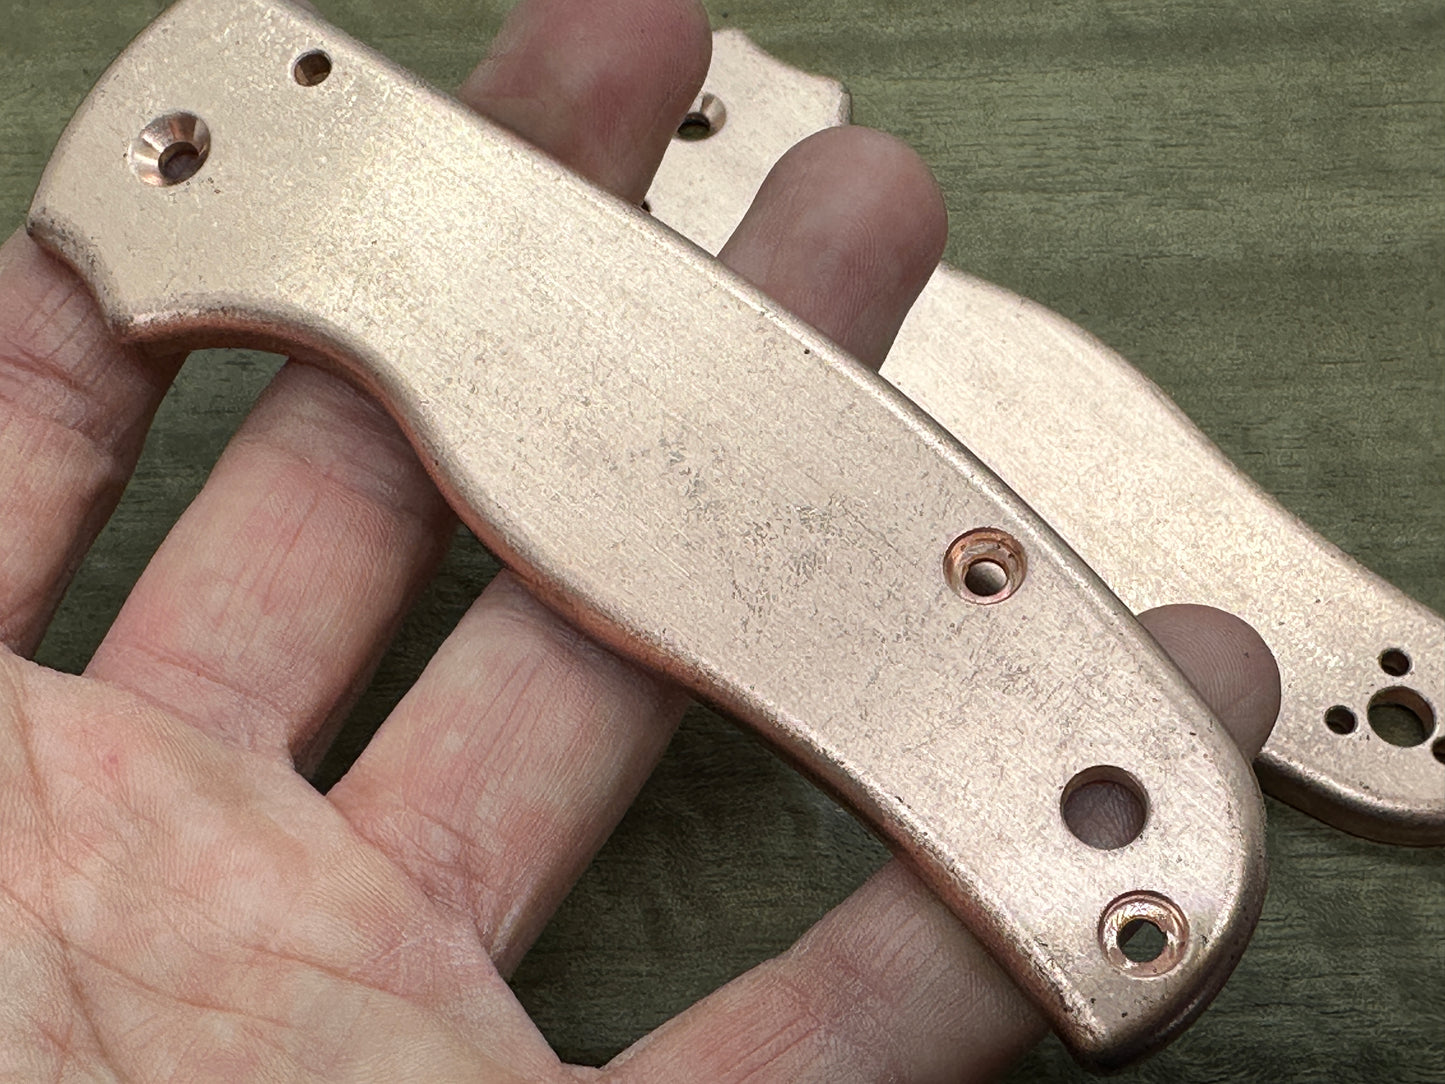 Tumbled Copper Scales for SHAMAN Spyderco